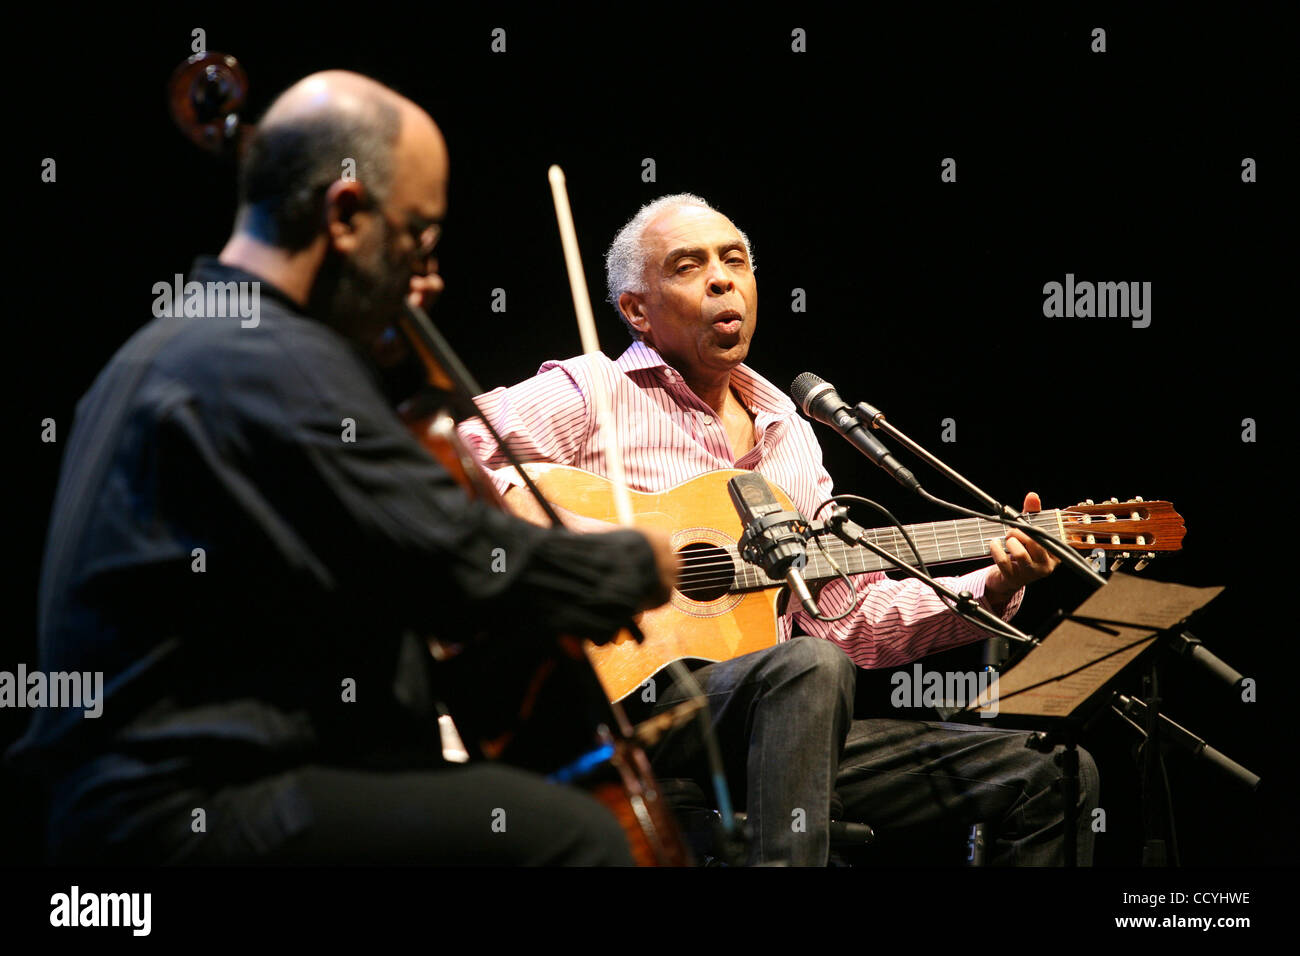 Brazilian singer and former Minister of Culture Gilberto Gil (R) performs with Jaques Morelenbaum on stage during the String Concert at UCLA Royce Hall in Los Angeles. (Photo by Ringo Chiu / Zuma Press) Stock Photo